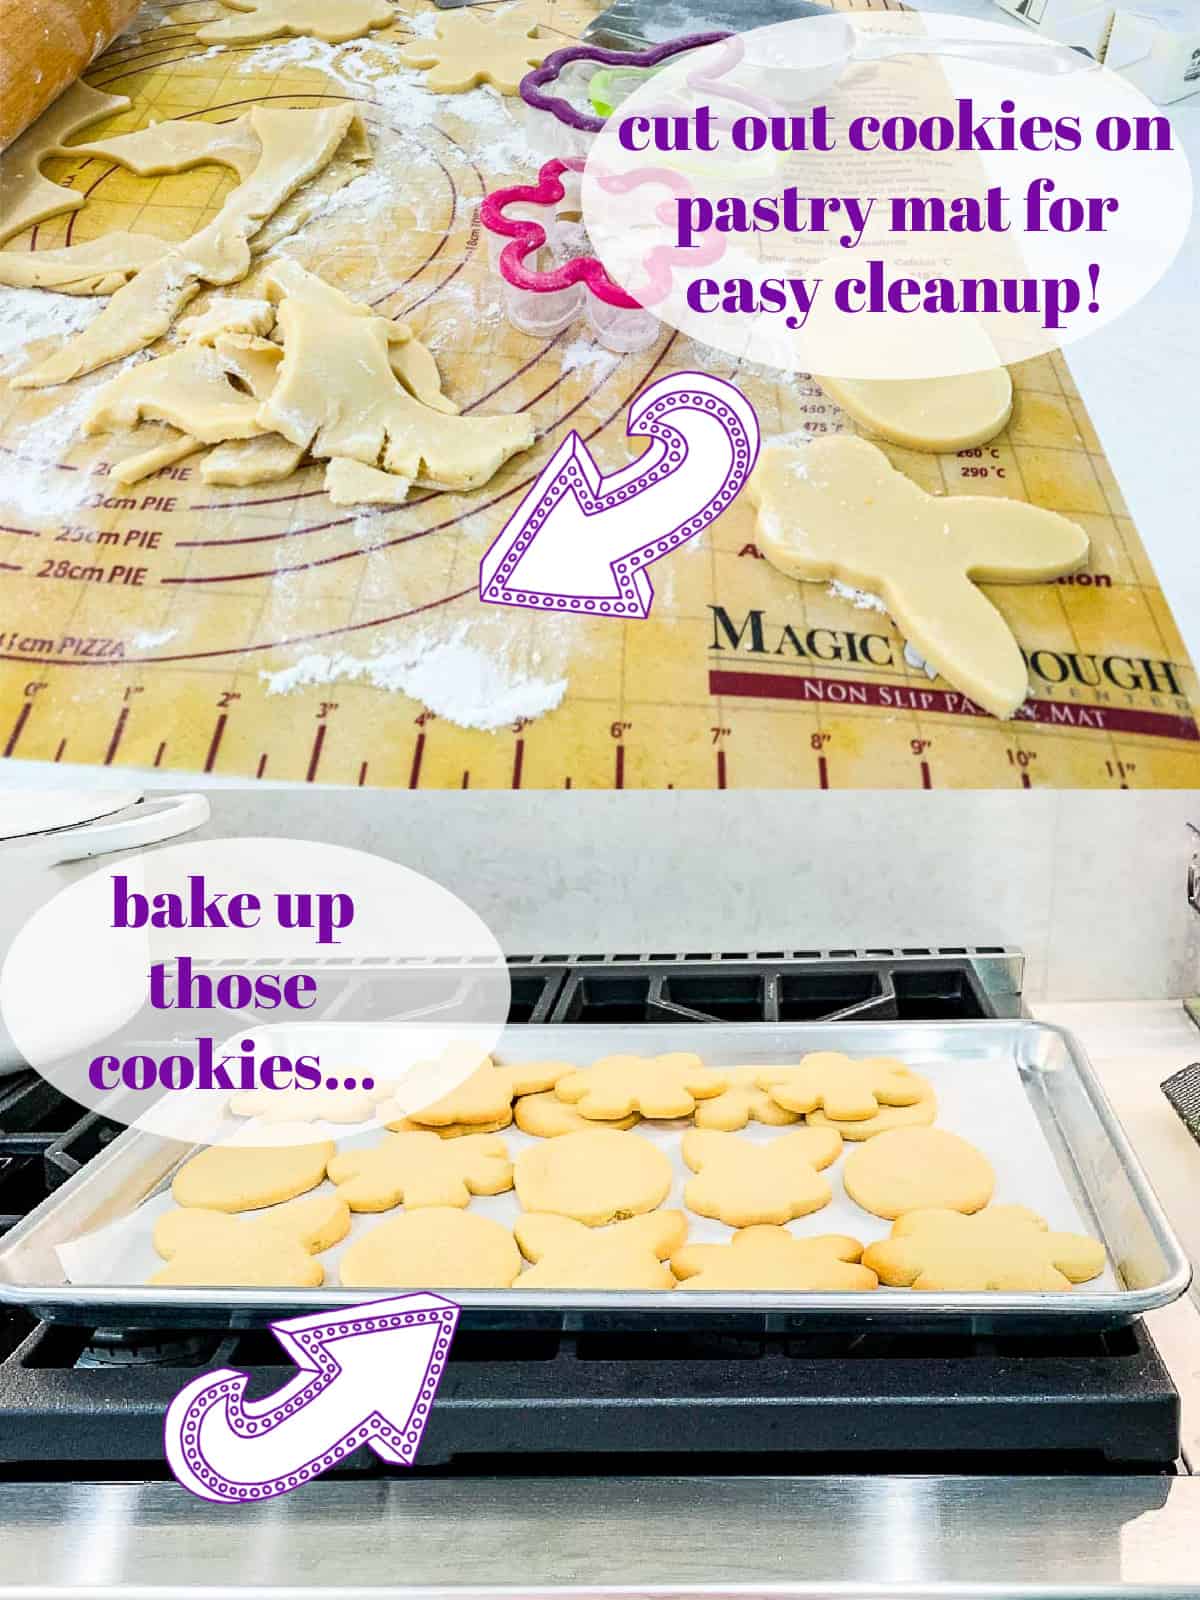 Two steps showing cutting out Easter cookies on a pastry mat and them baked on top of the oven.